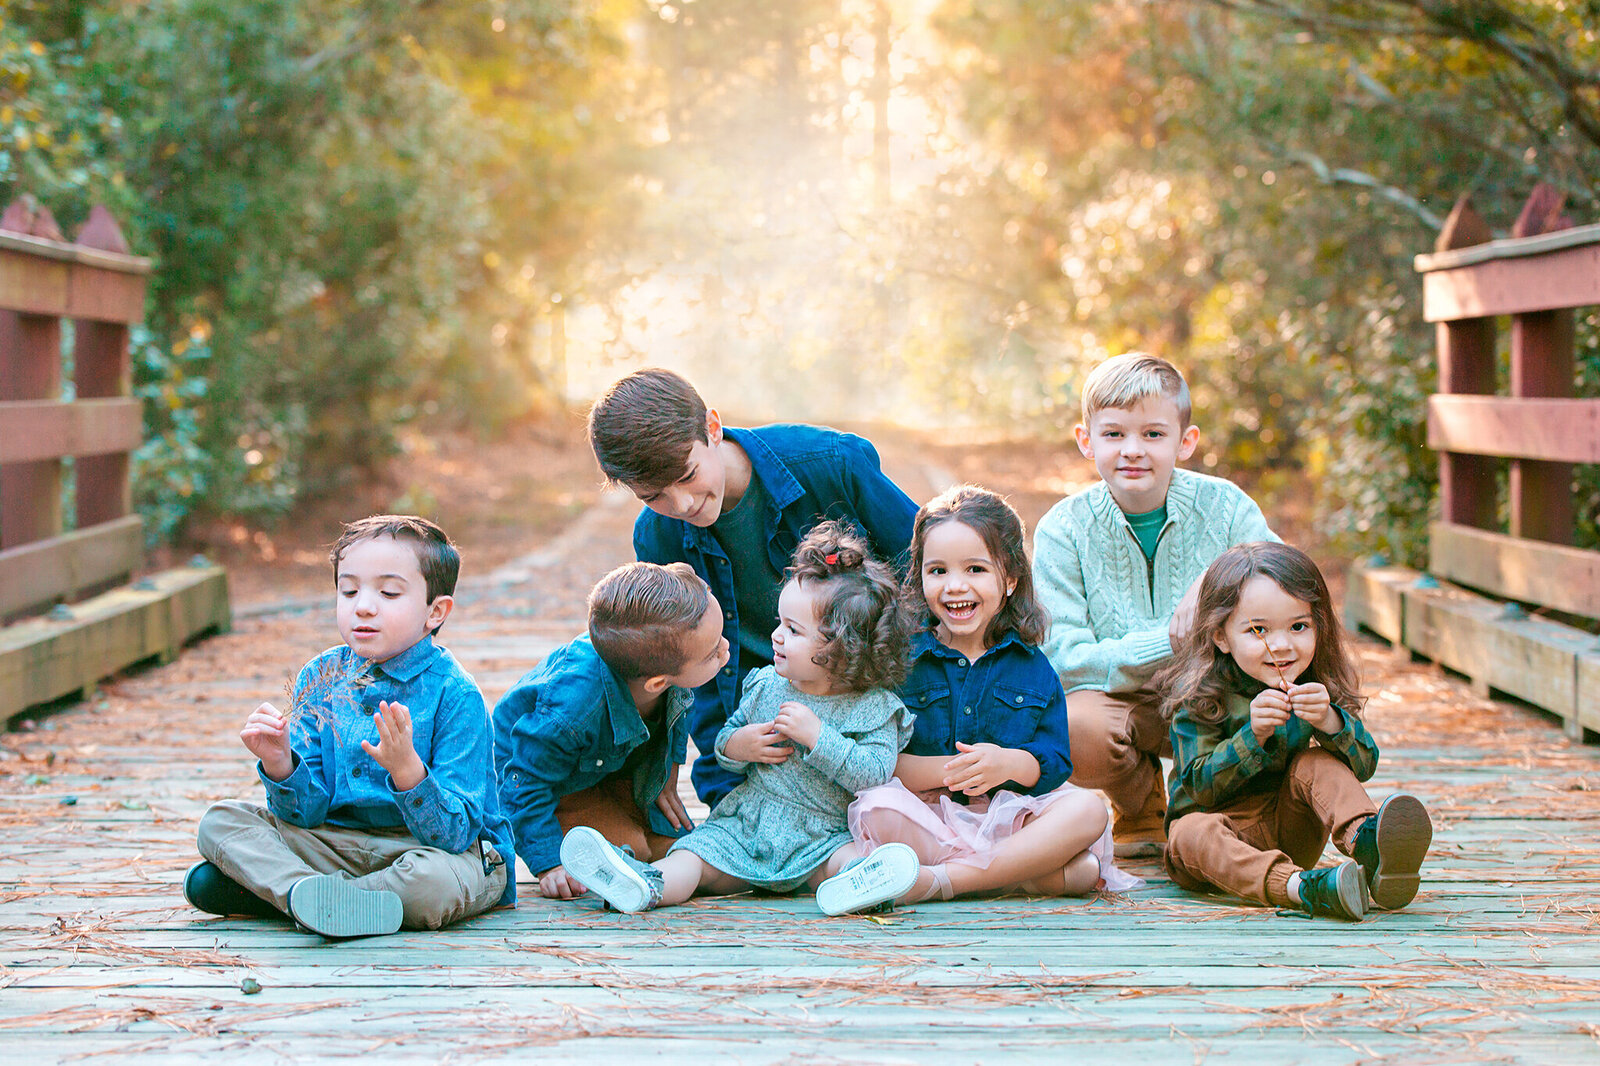 Extended family photos with cousin sitting together on a bridge in the woods as the light shines through the trees in the distance captured by Family photographer Hampton Roads va